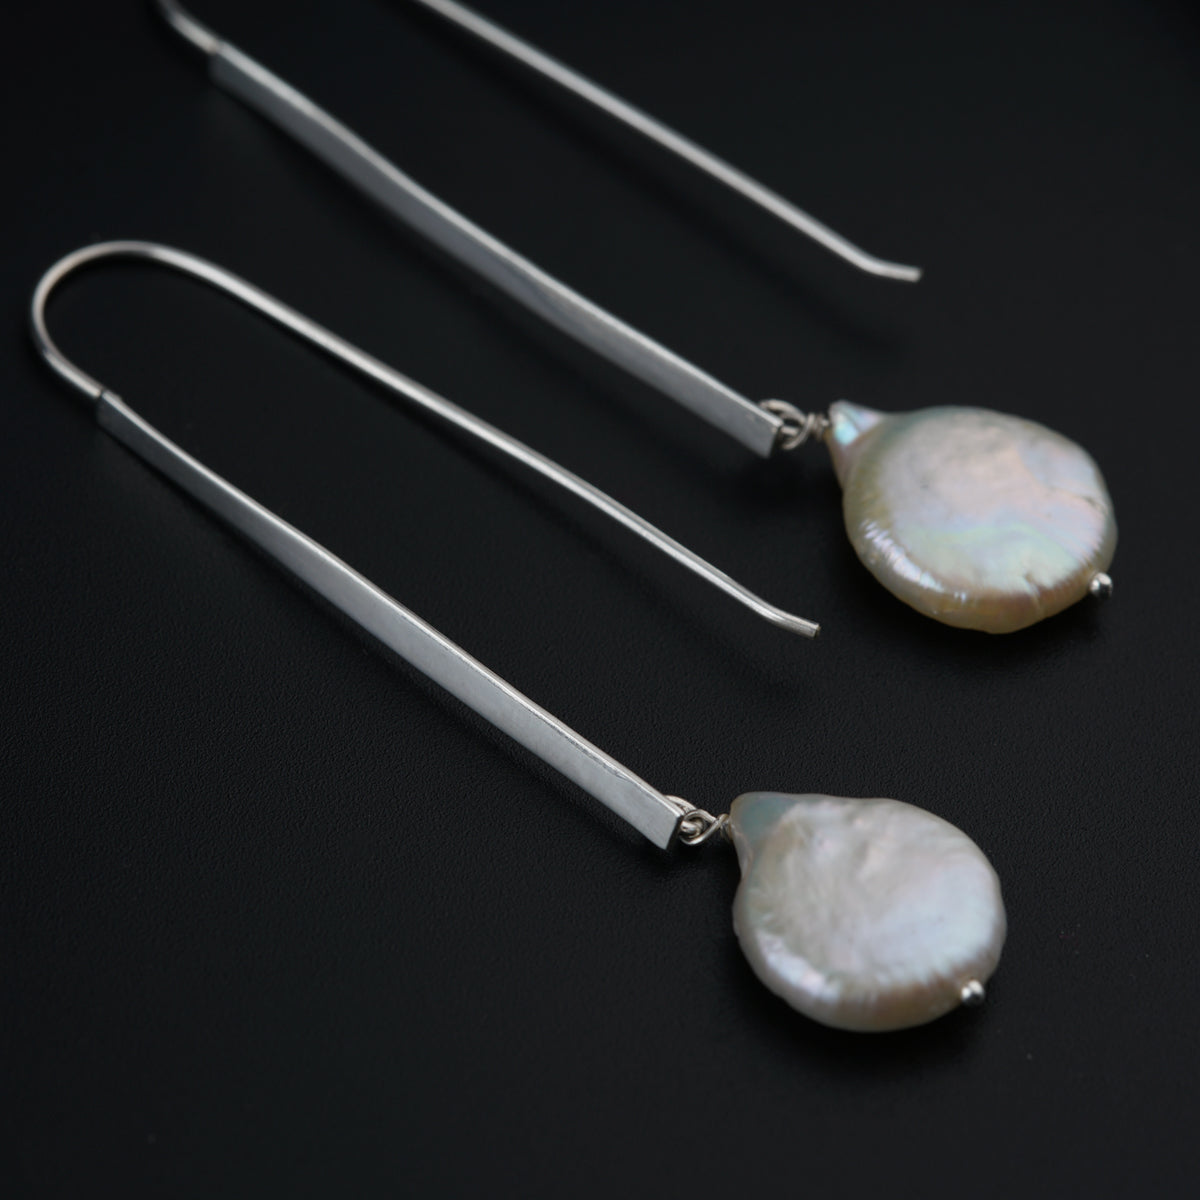 a pair of earrings with a white pearl hanging from them